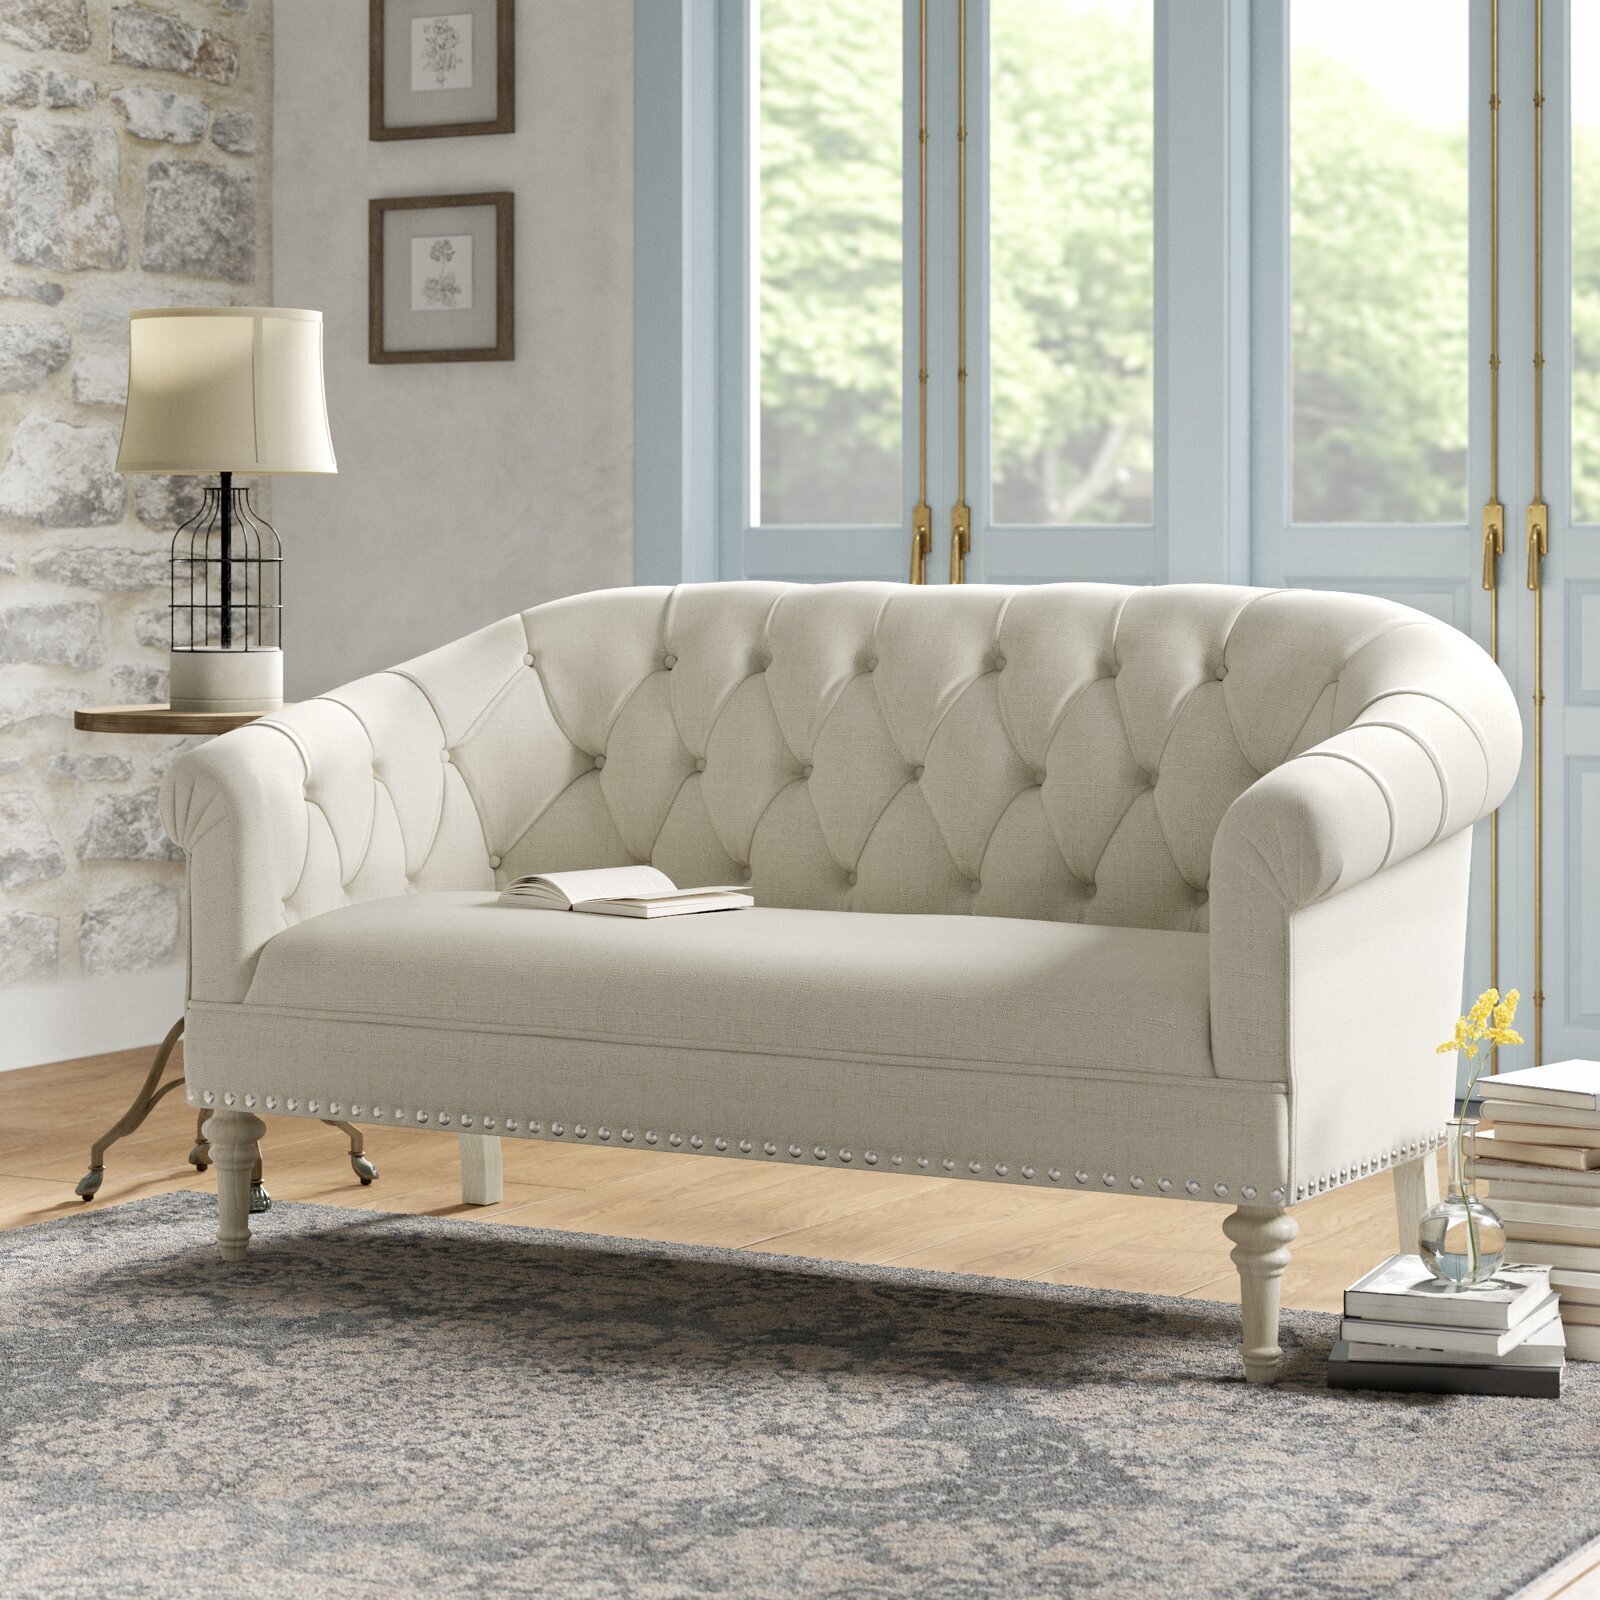 Traditional French Country Sofa